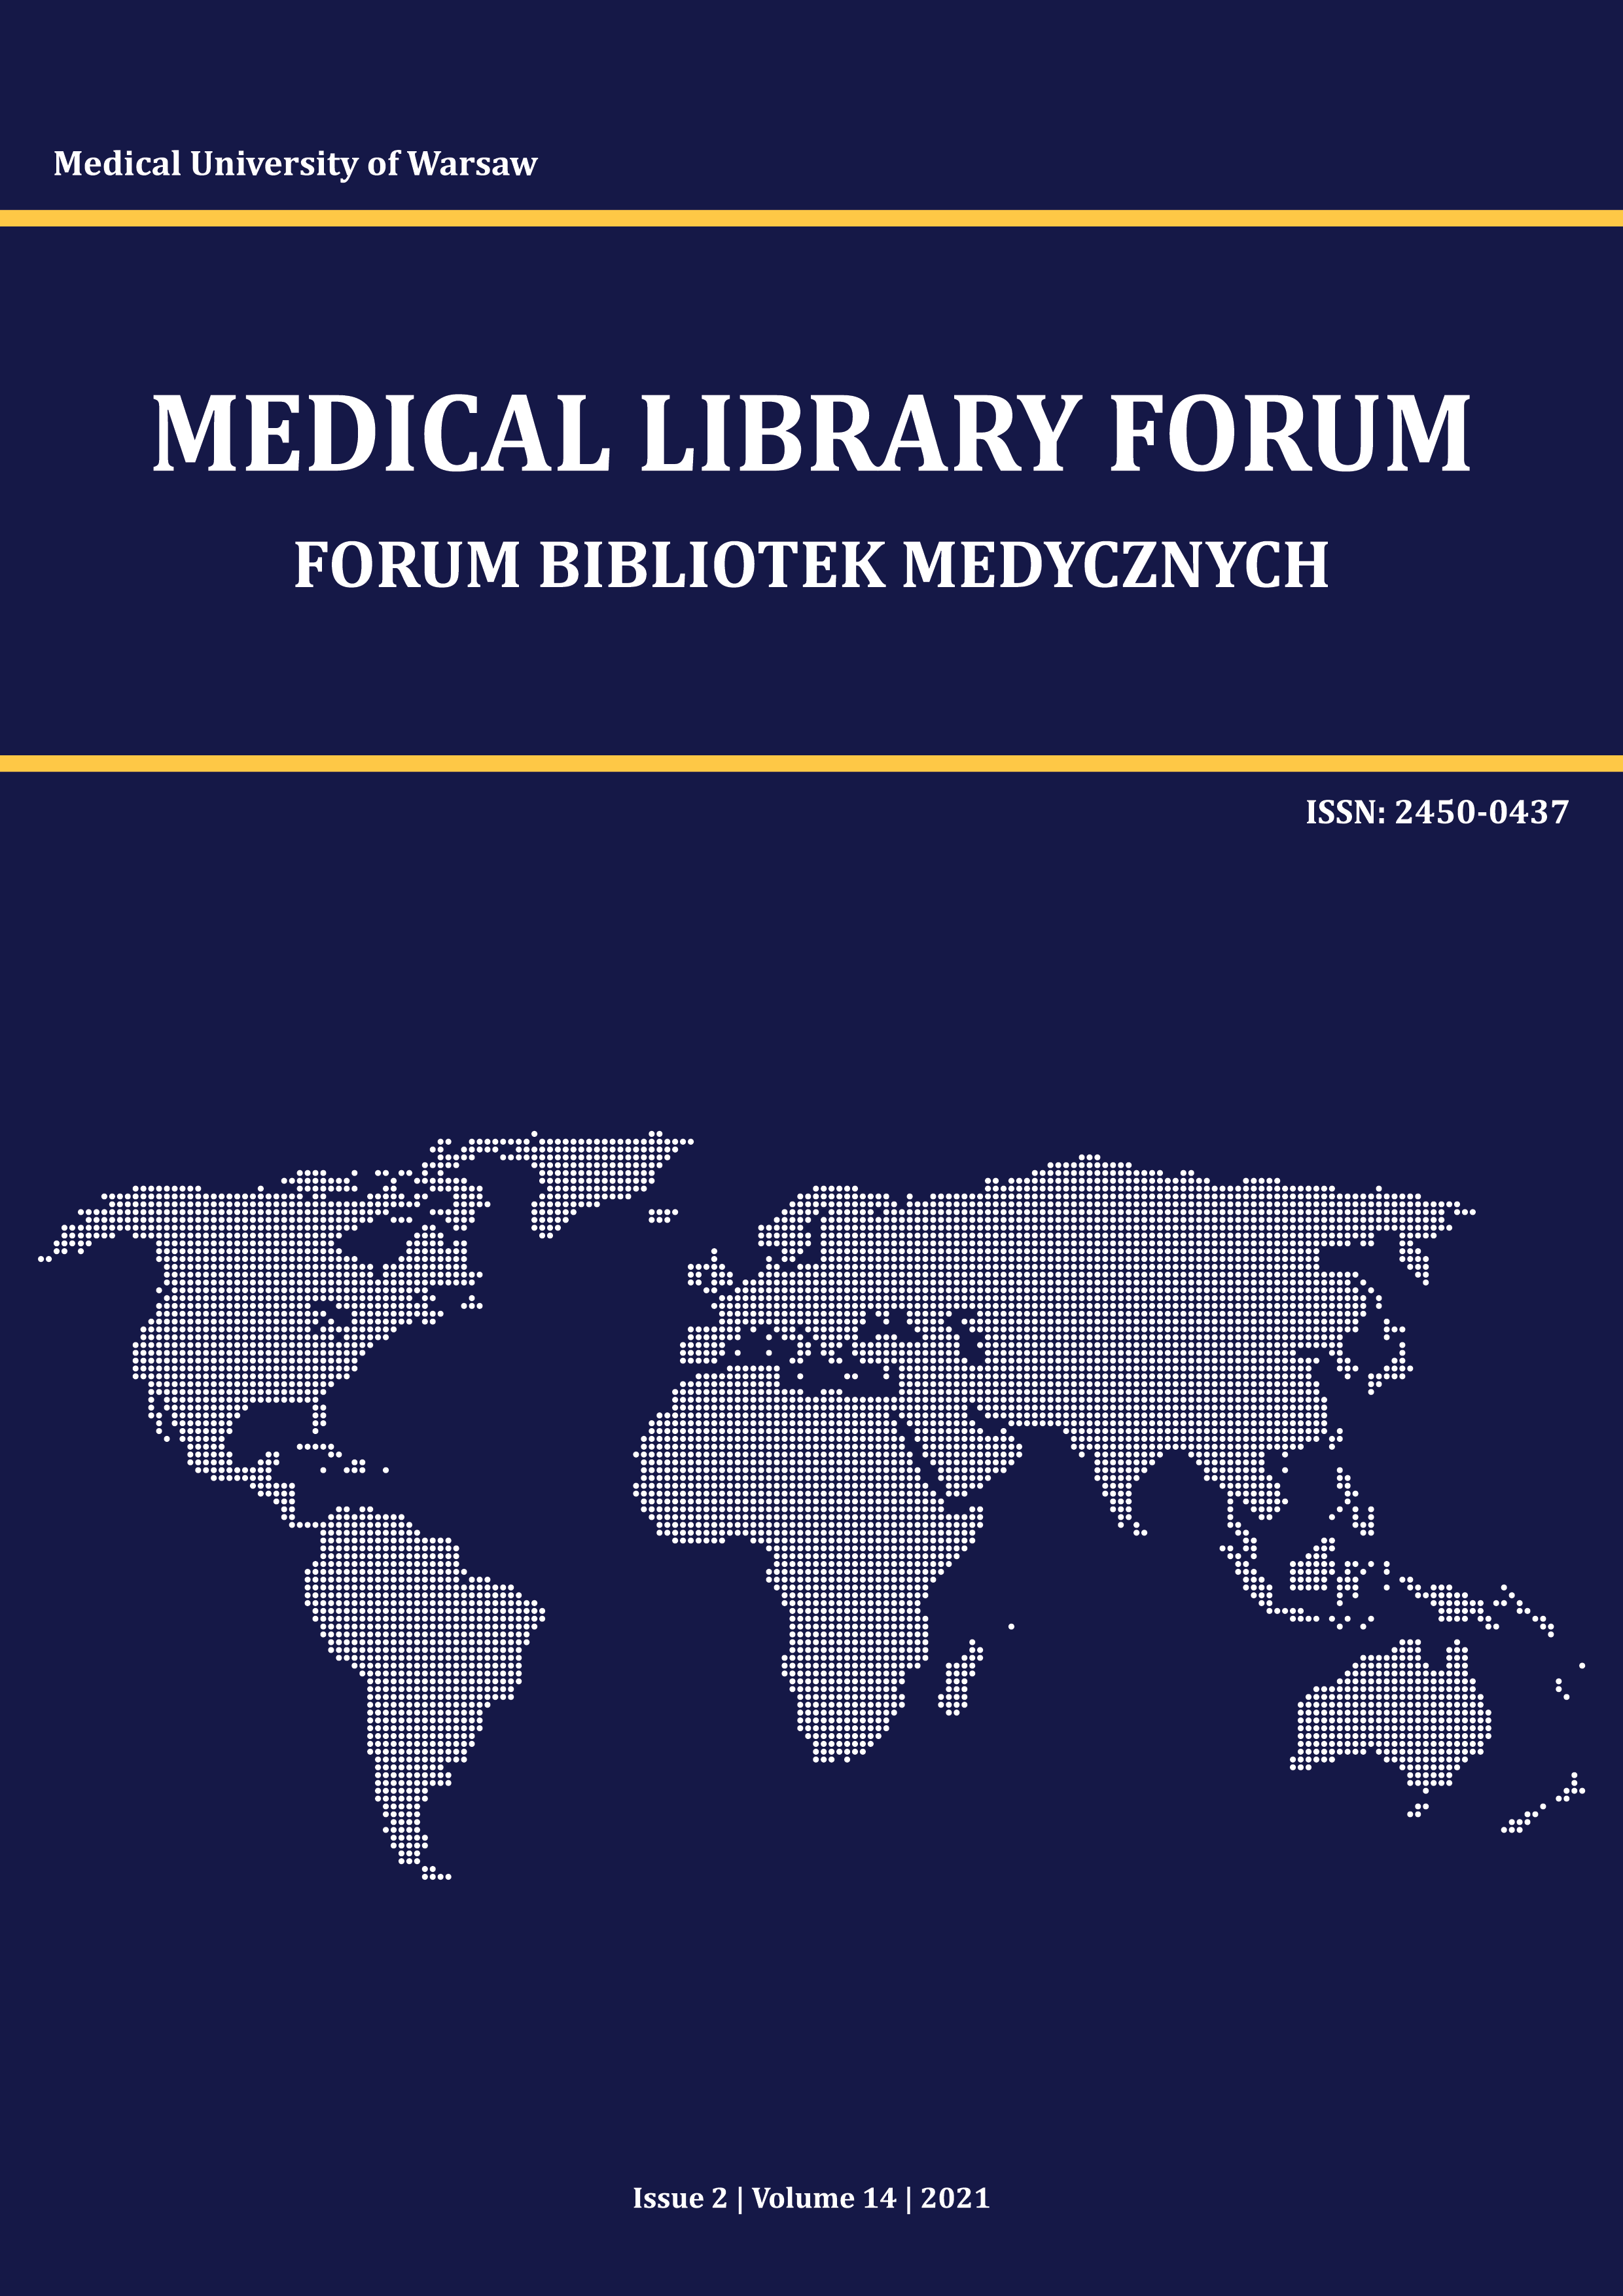 Cover of the Medical Library Forum